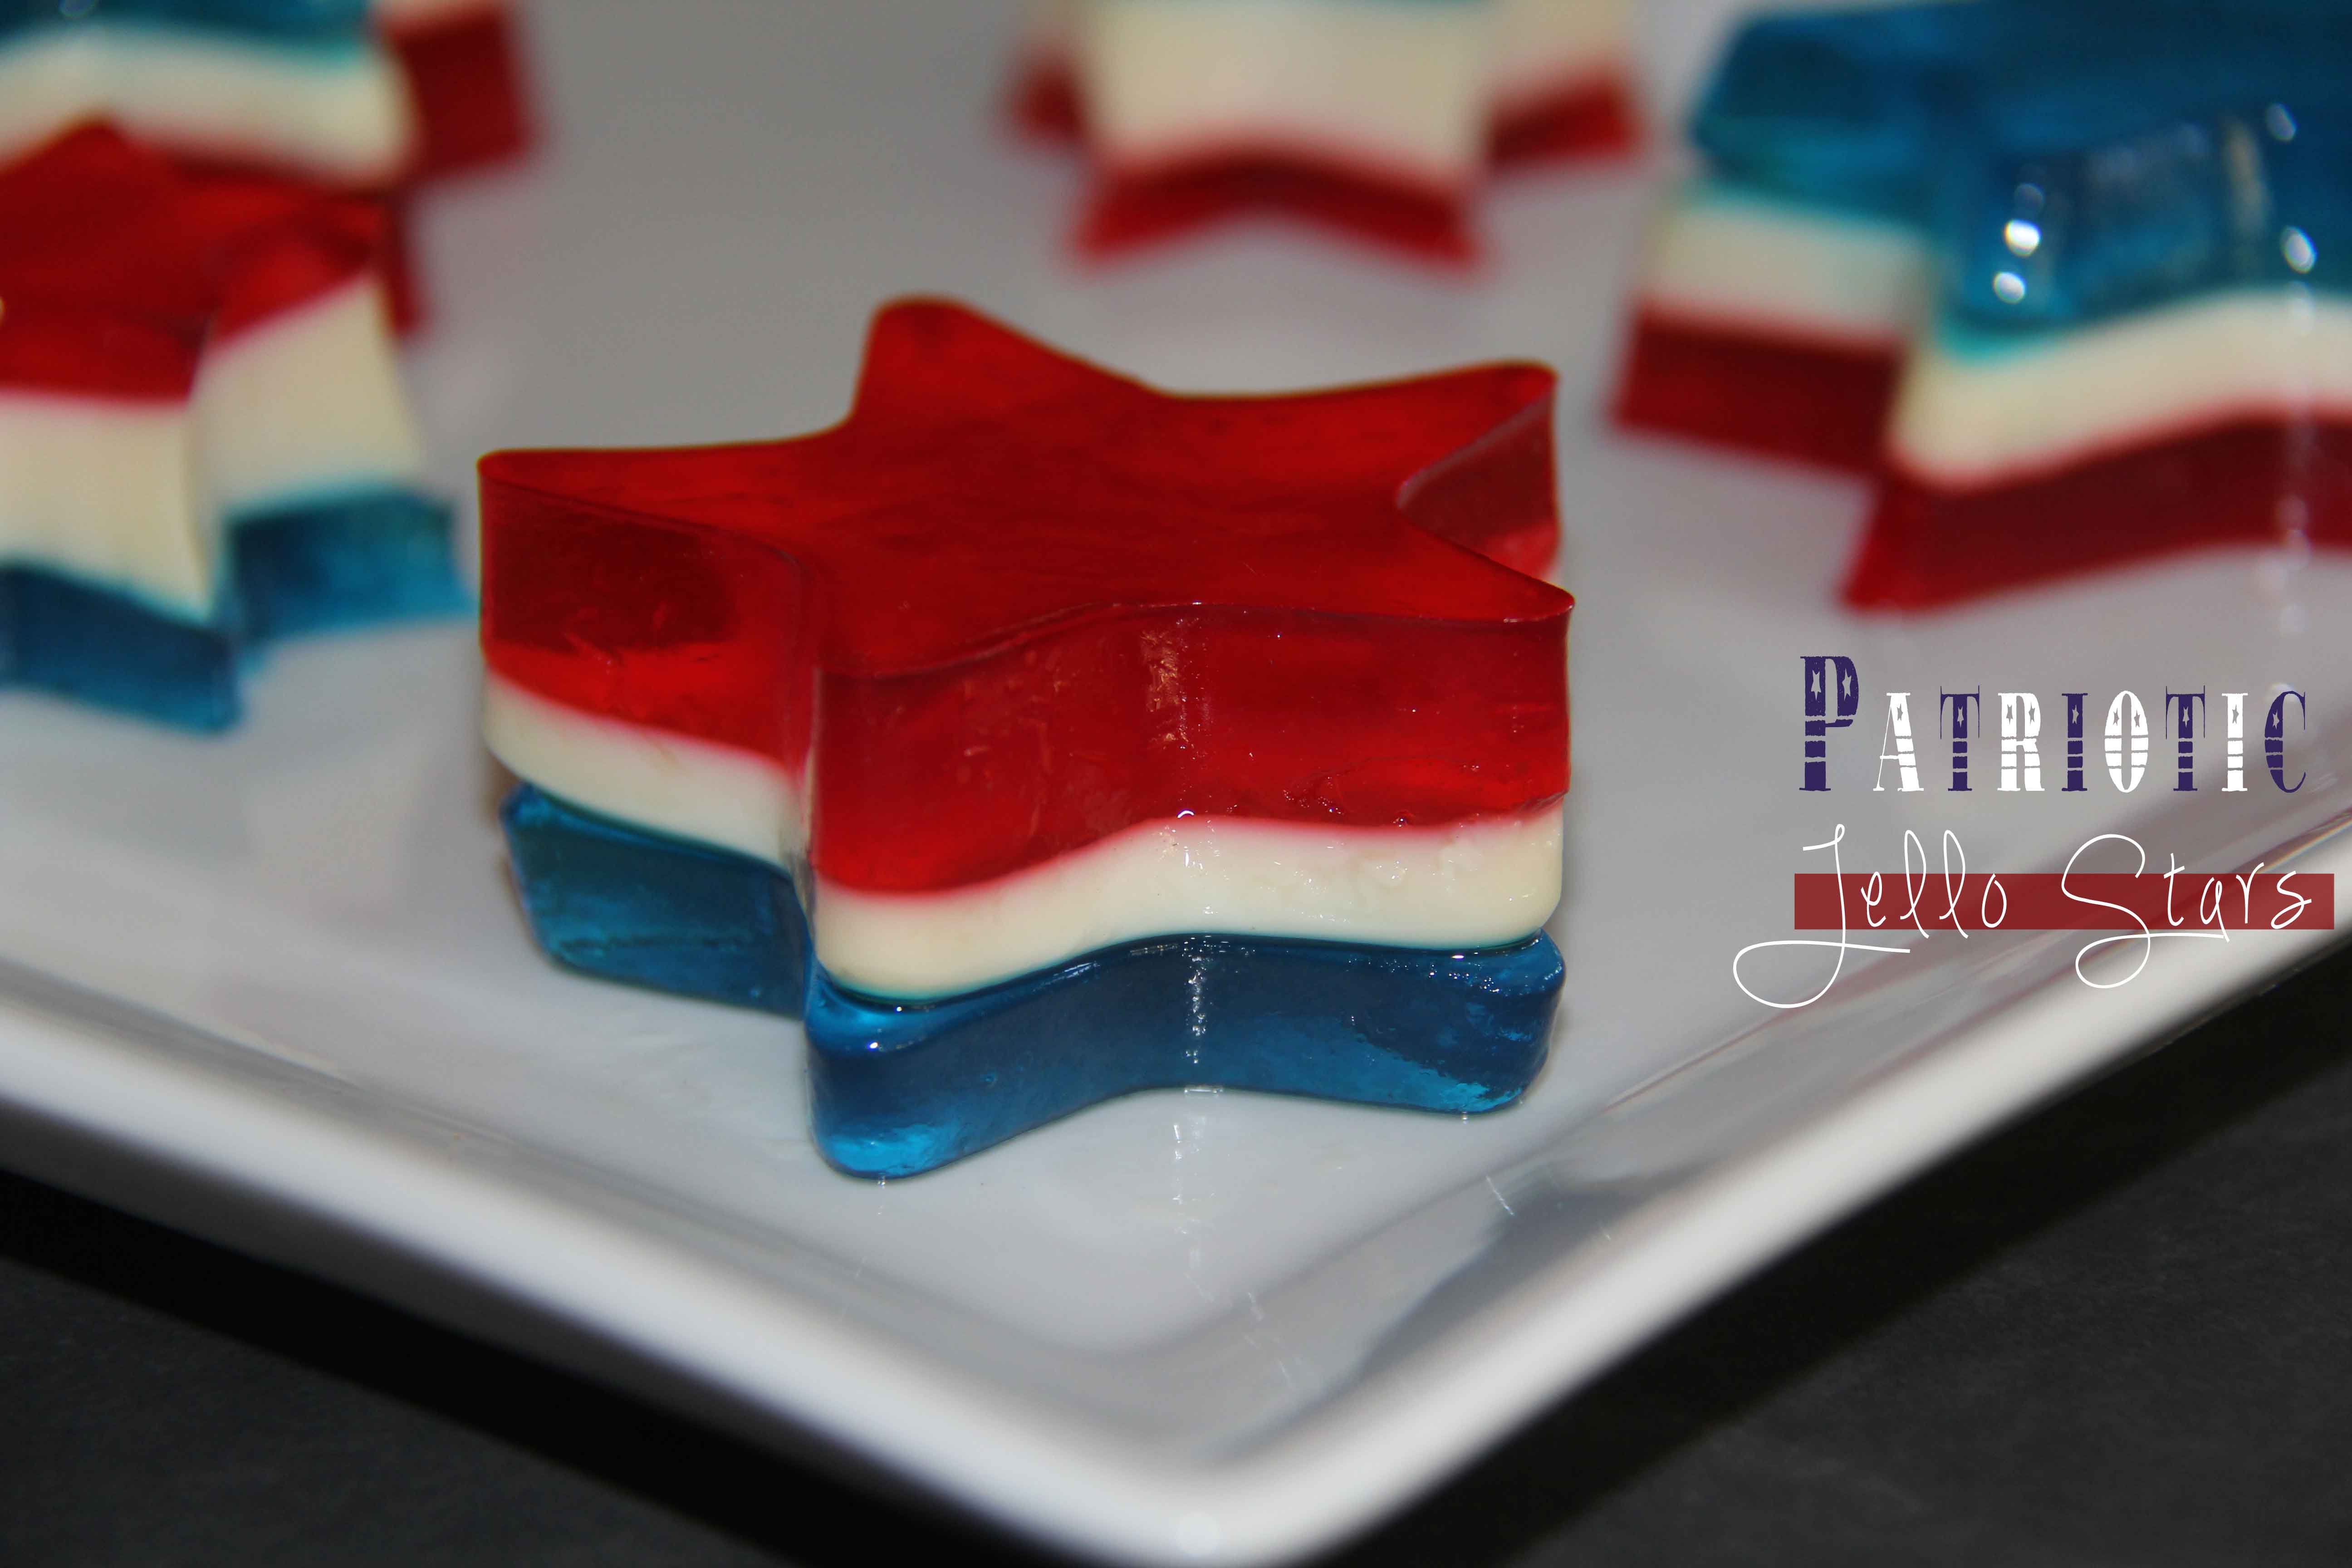 Patriotic Jello Stars - Reviewed and tested by one of the 3 crazy sisters at https://madefrompinterest.net